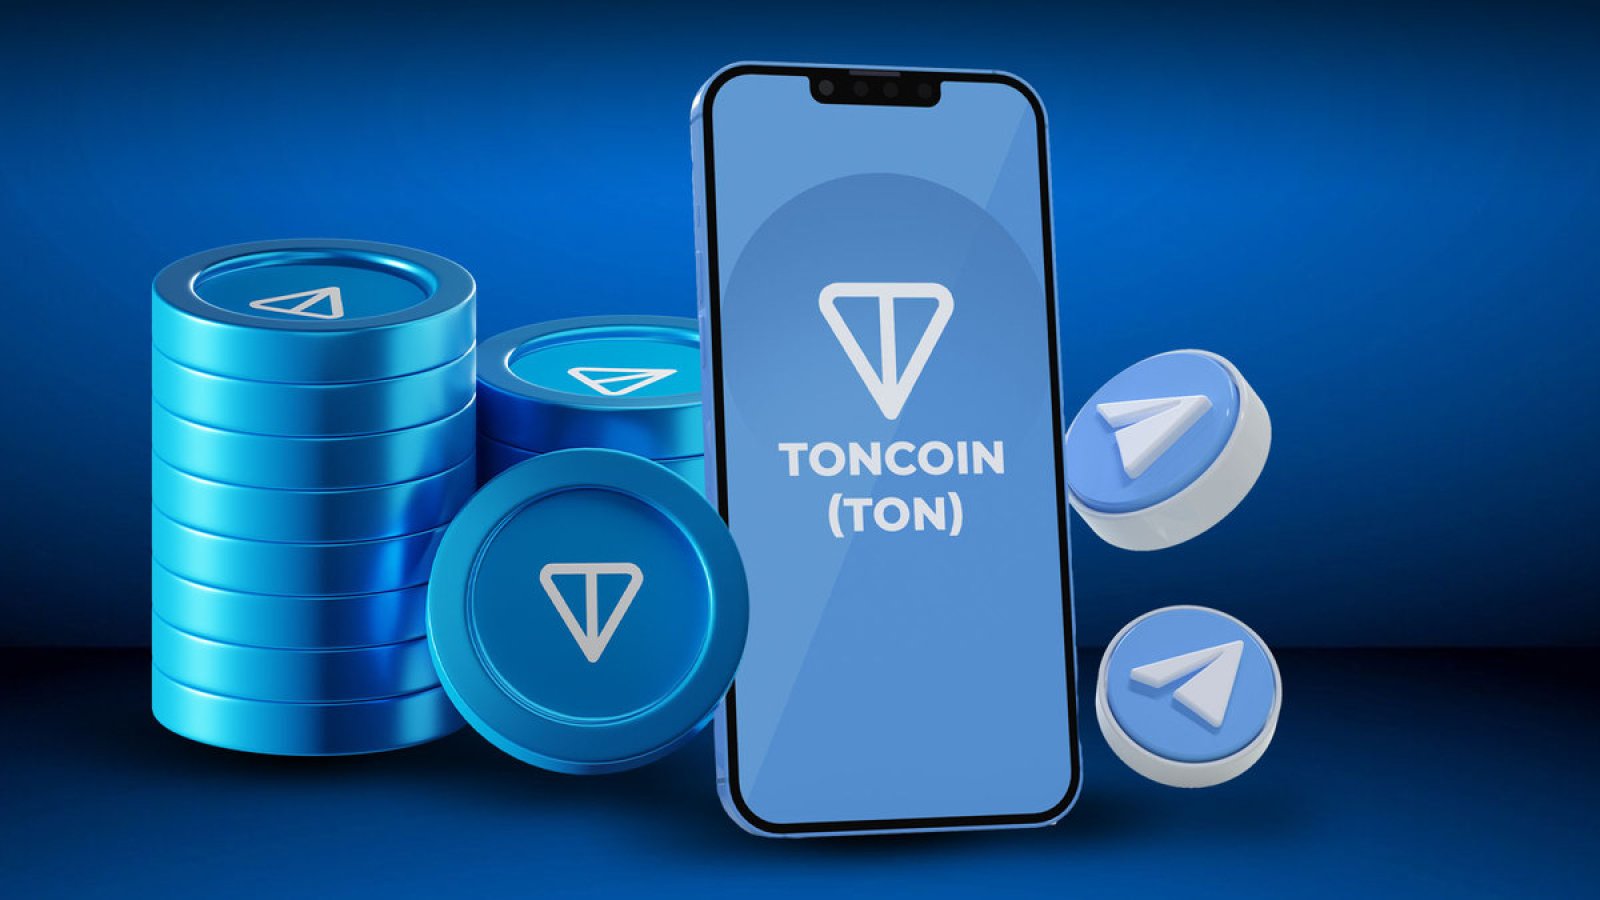 TON - The Open Network - blockchain platform with Toncoin cryptocurrency